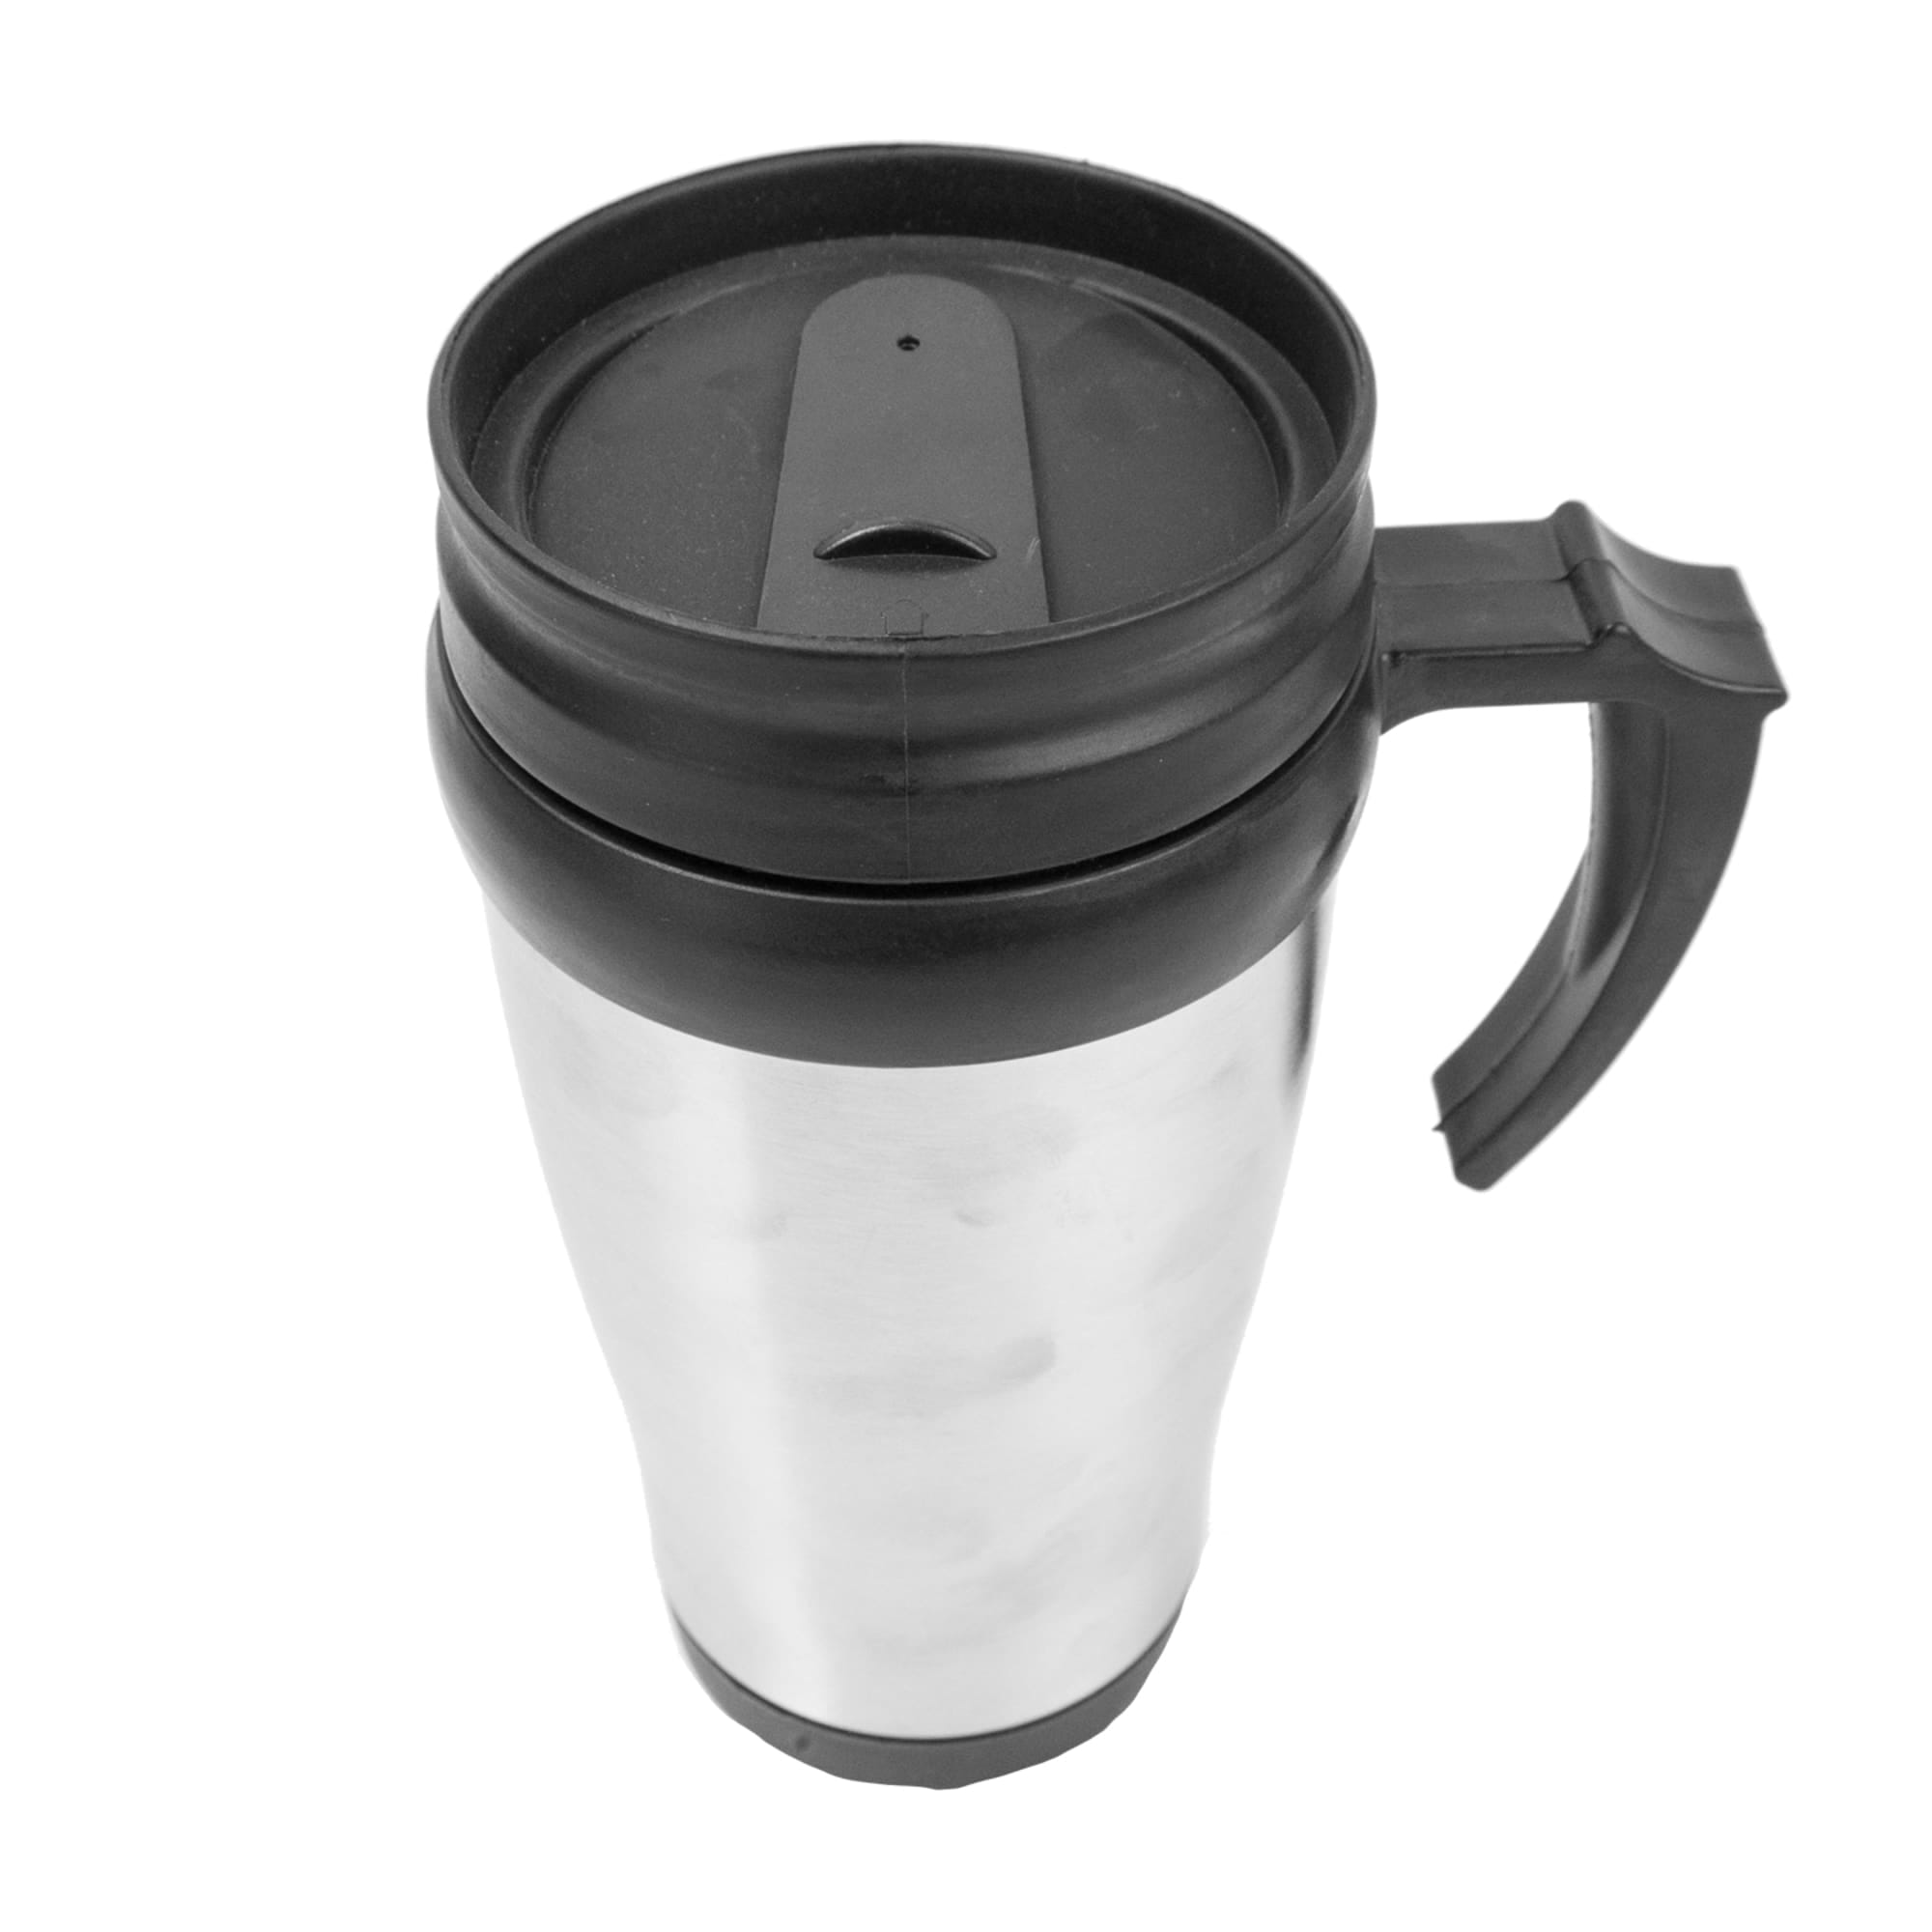 Home Basics 16 oz. Stainless Steel Insulated Travel Mug with Handle $3.00 EACH, CASE PACK OF 24